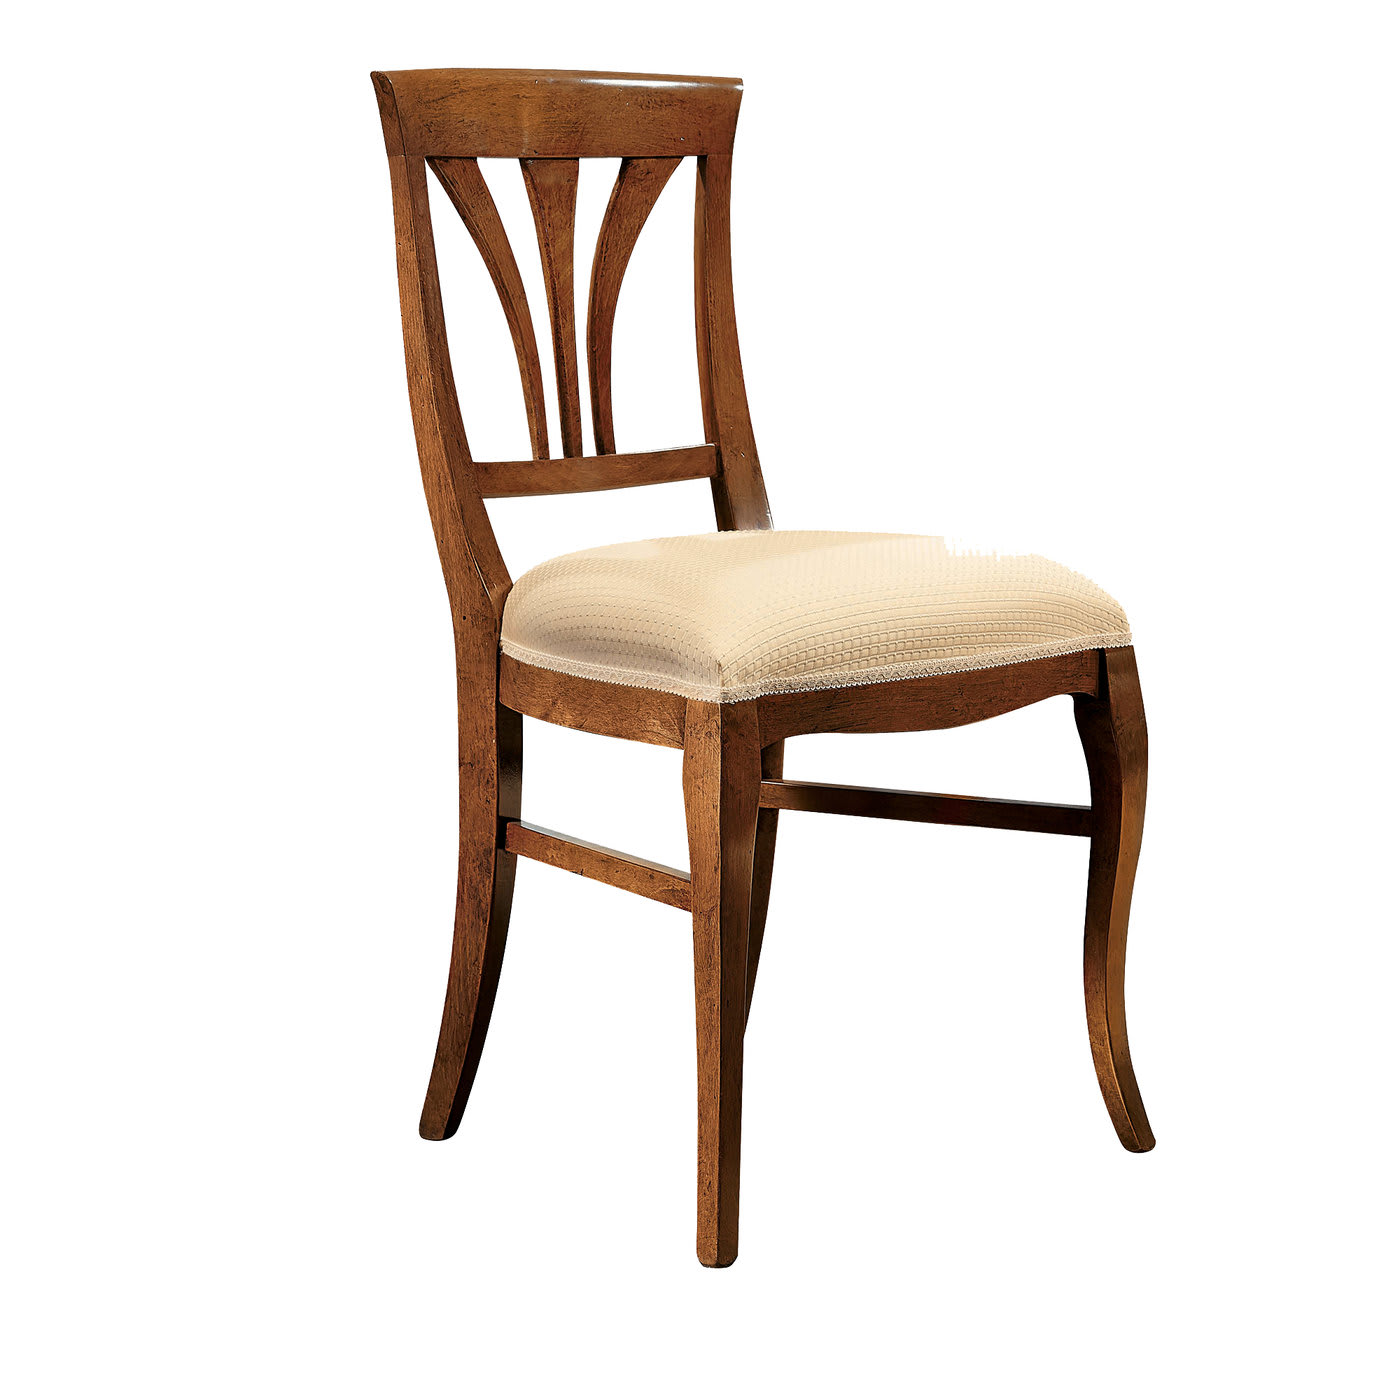 Set of 6 Beige Classic Dining Chairs - Modenese Gastone